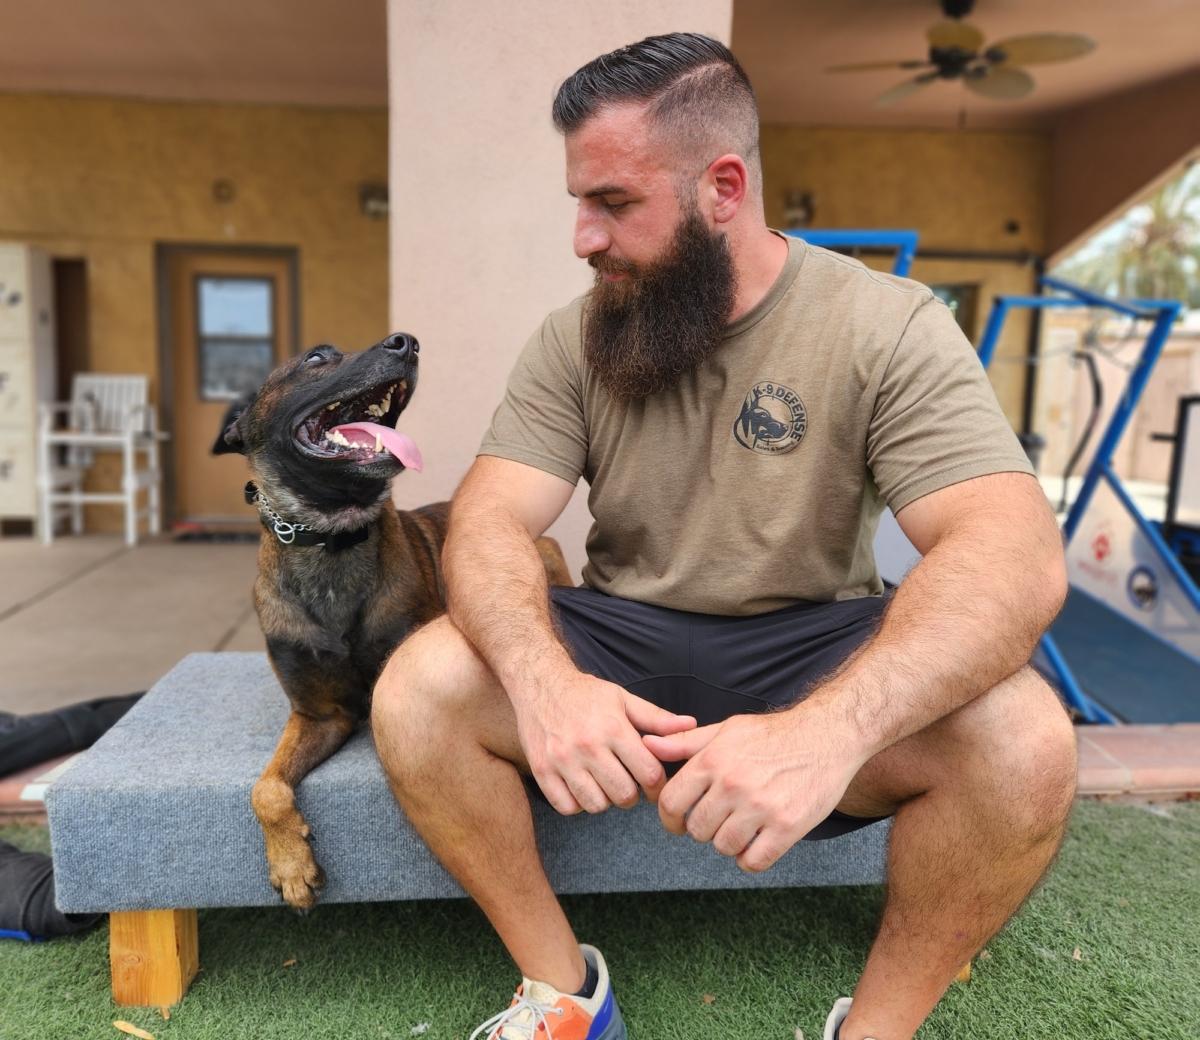 Chris Kamma, business development director at K9 Defense in Scottsdale, Ariz., spends quality time with Ditto, a 3-year-old Belgian Malinois "clone" on July 11, 2023. (Allan Stein/The Epoch Times)